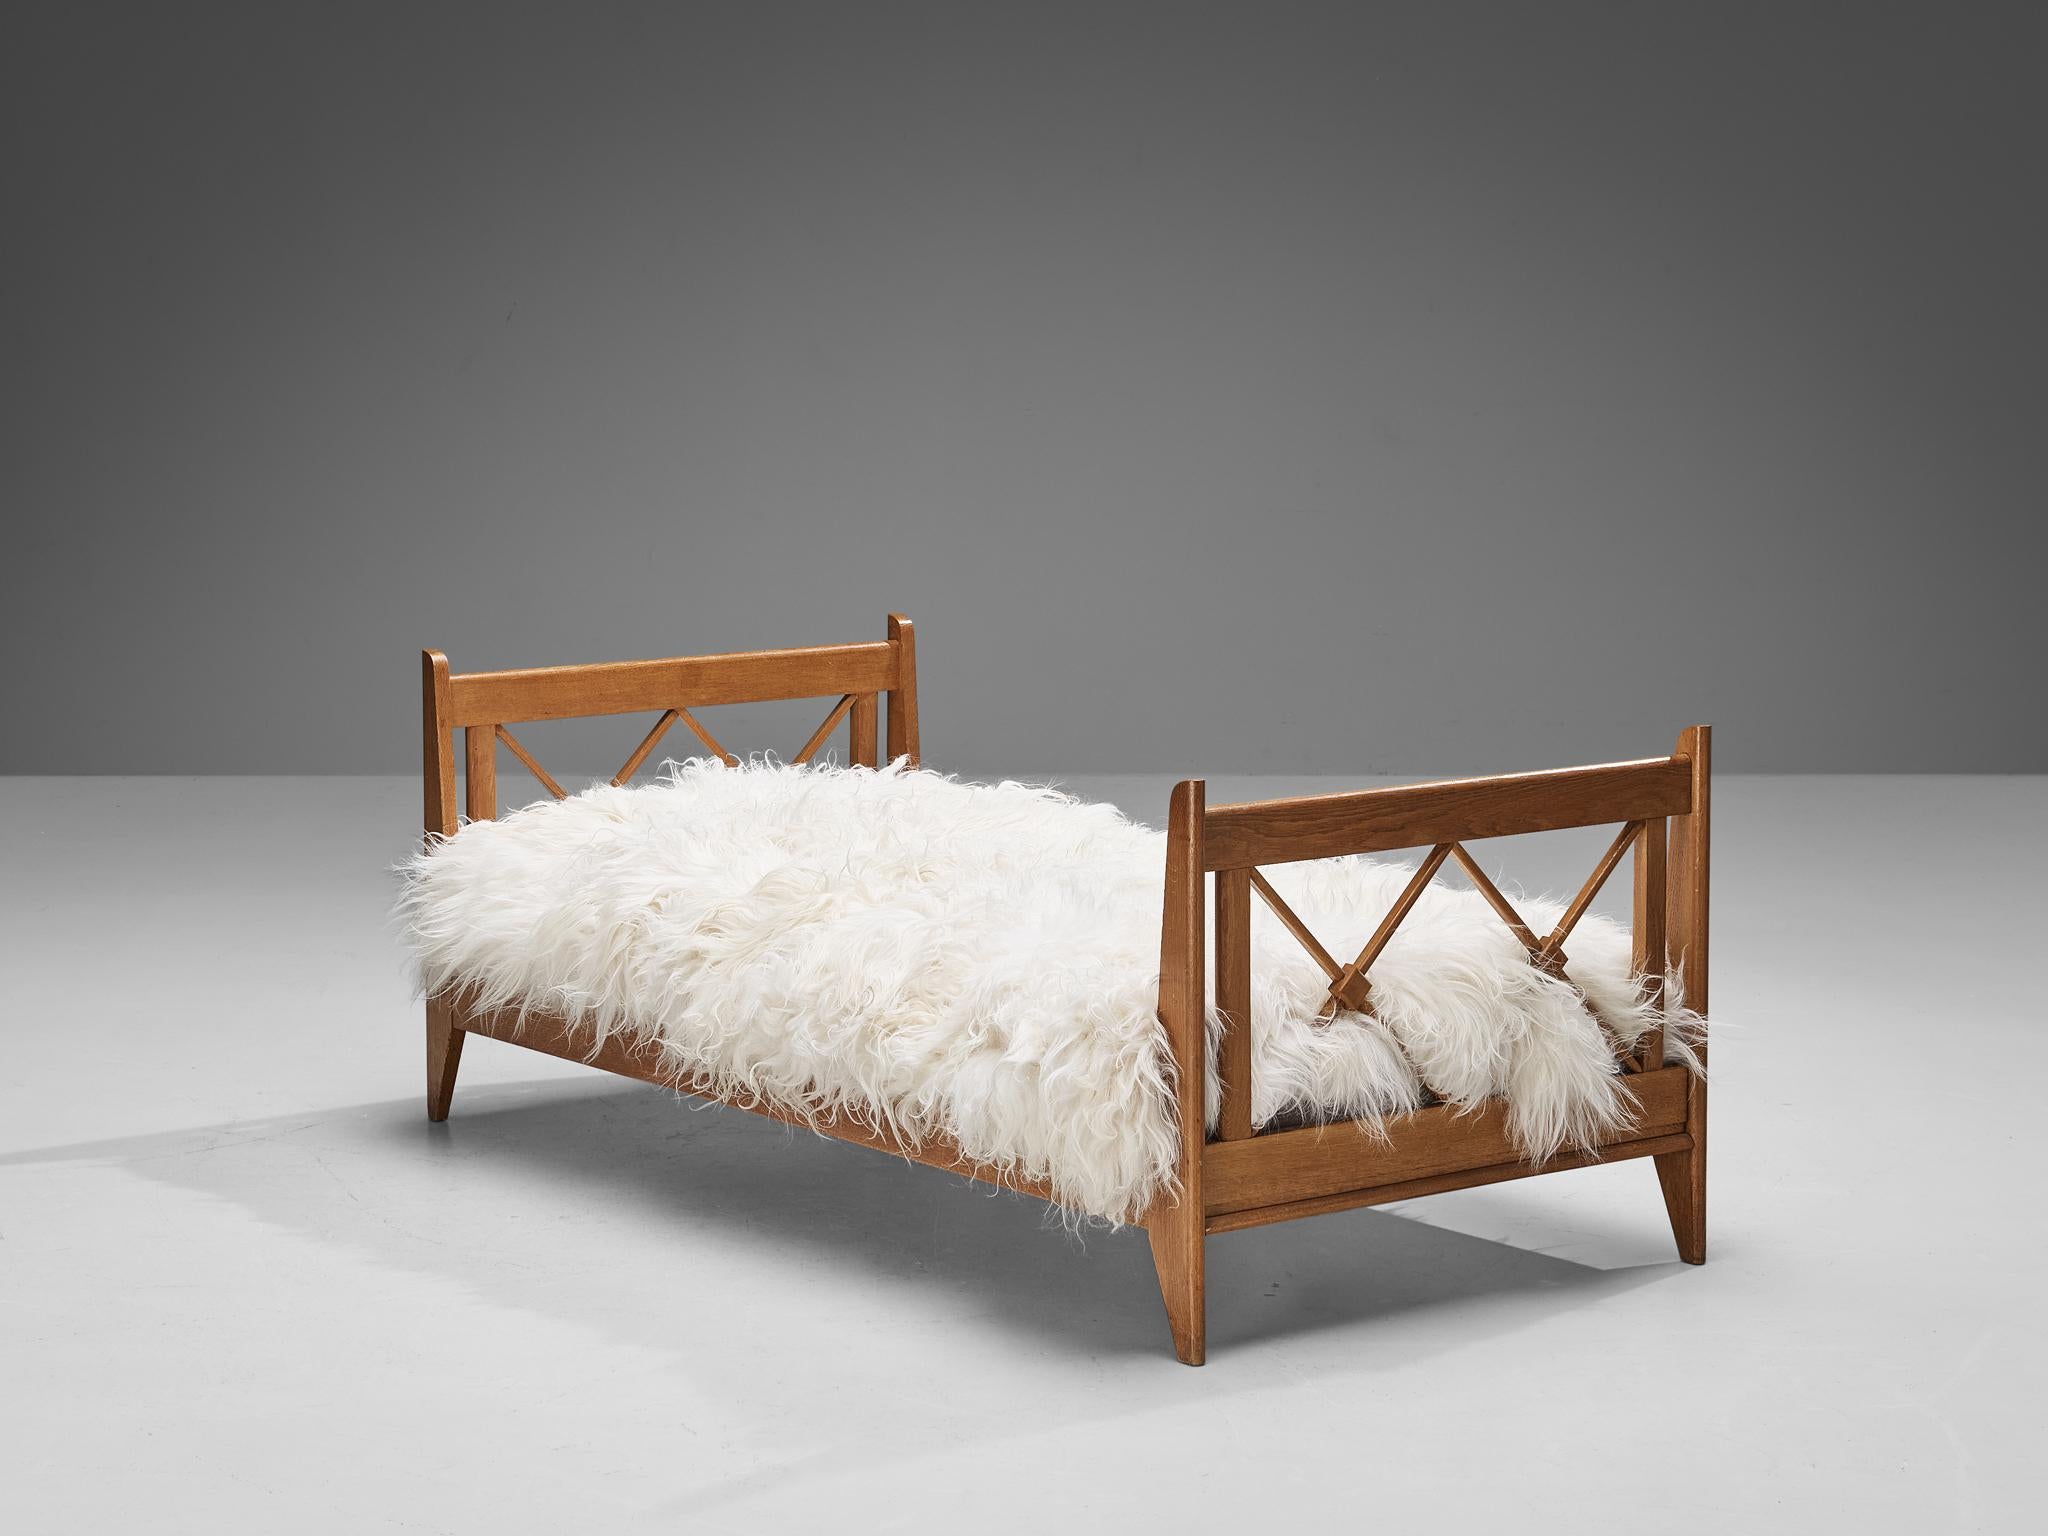 Single bed, oak, France, 1950s.

A beautifully made single bed in oakwood. It shows amazing craftsmanship that is evident in the interlocking crosses in the head- and footboard of the bed. The clean lines give, together with the choice of the